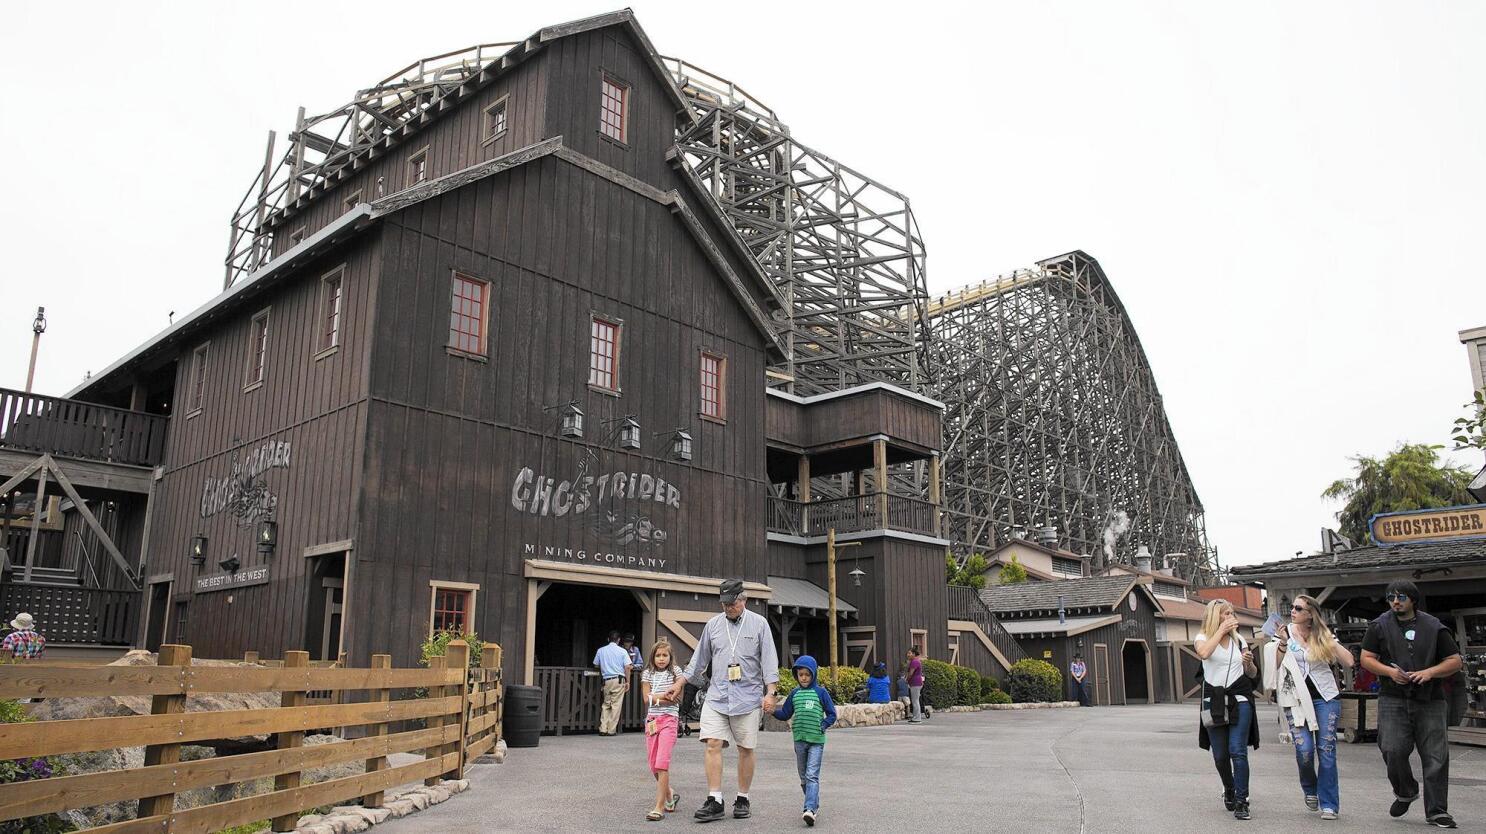 Knott's GhostRider roller coaster: longest, tallest and fastest